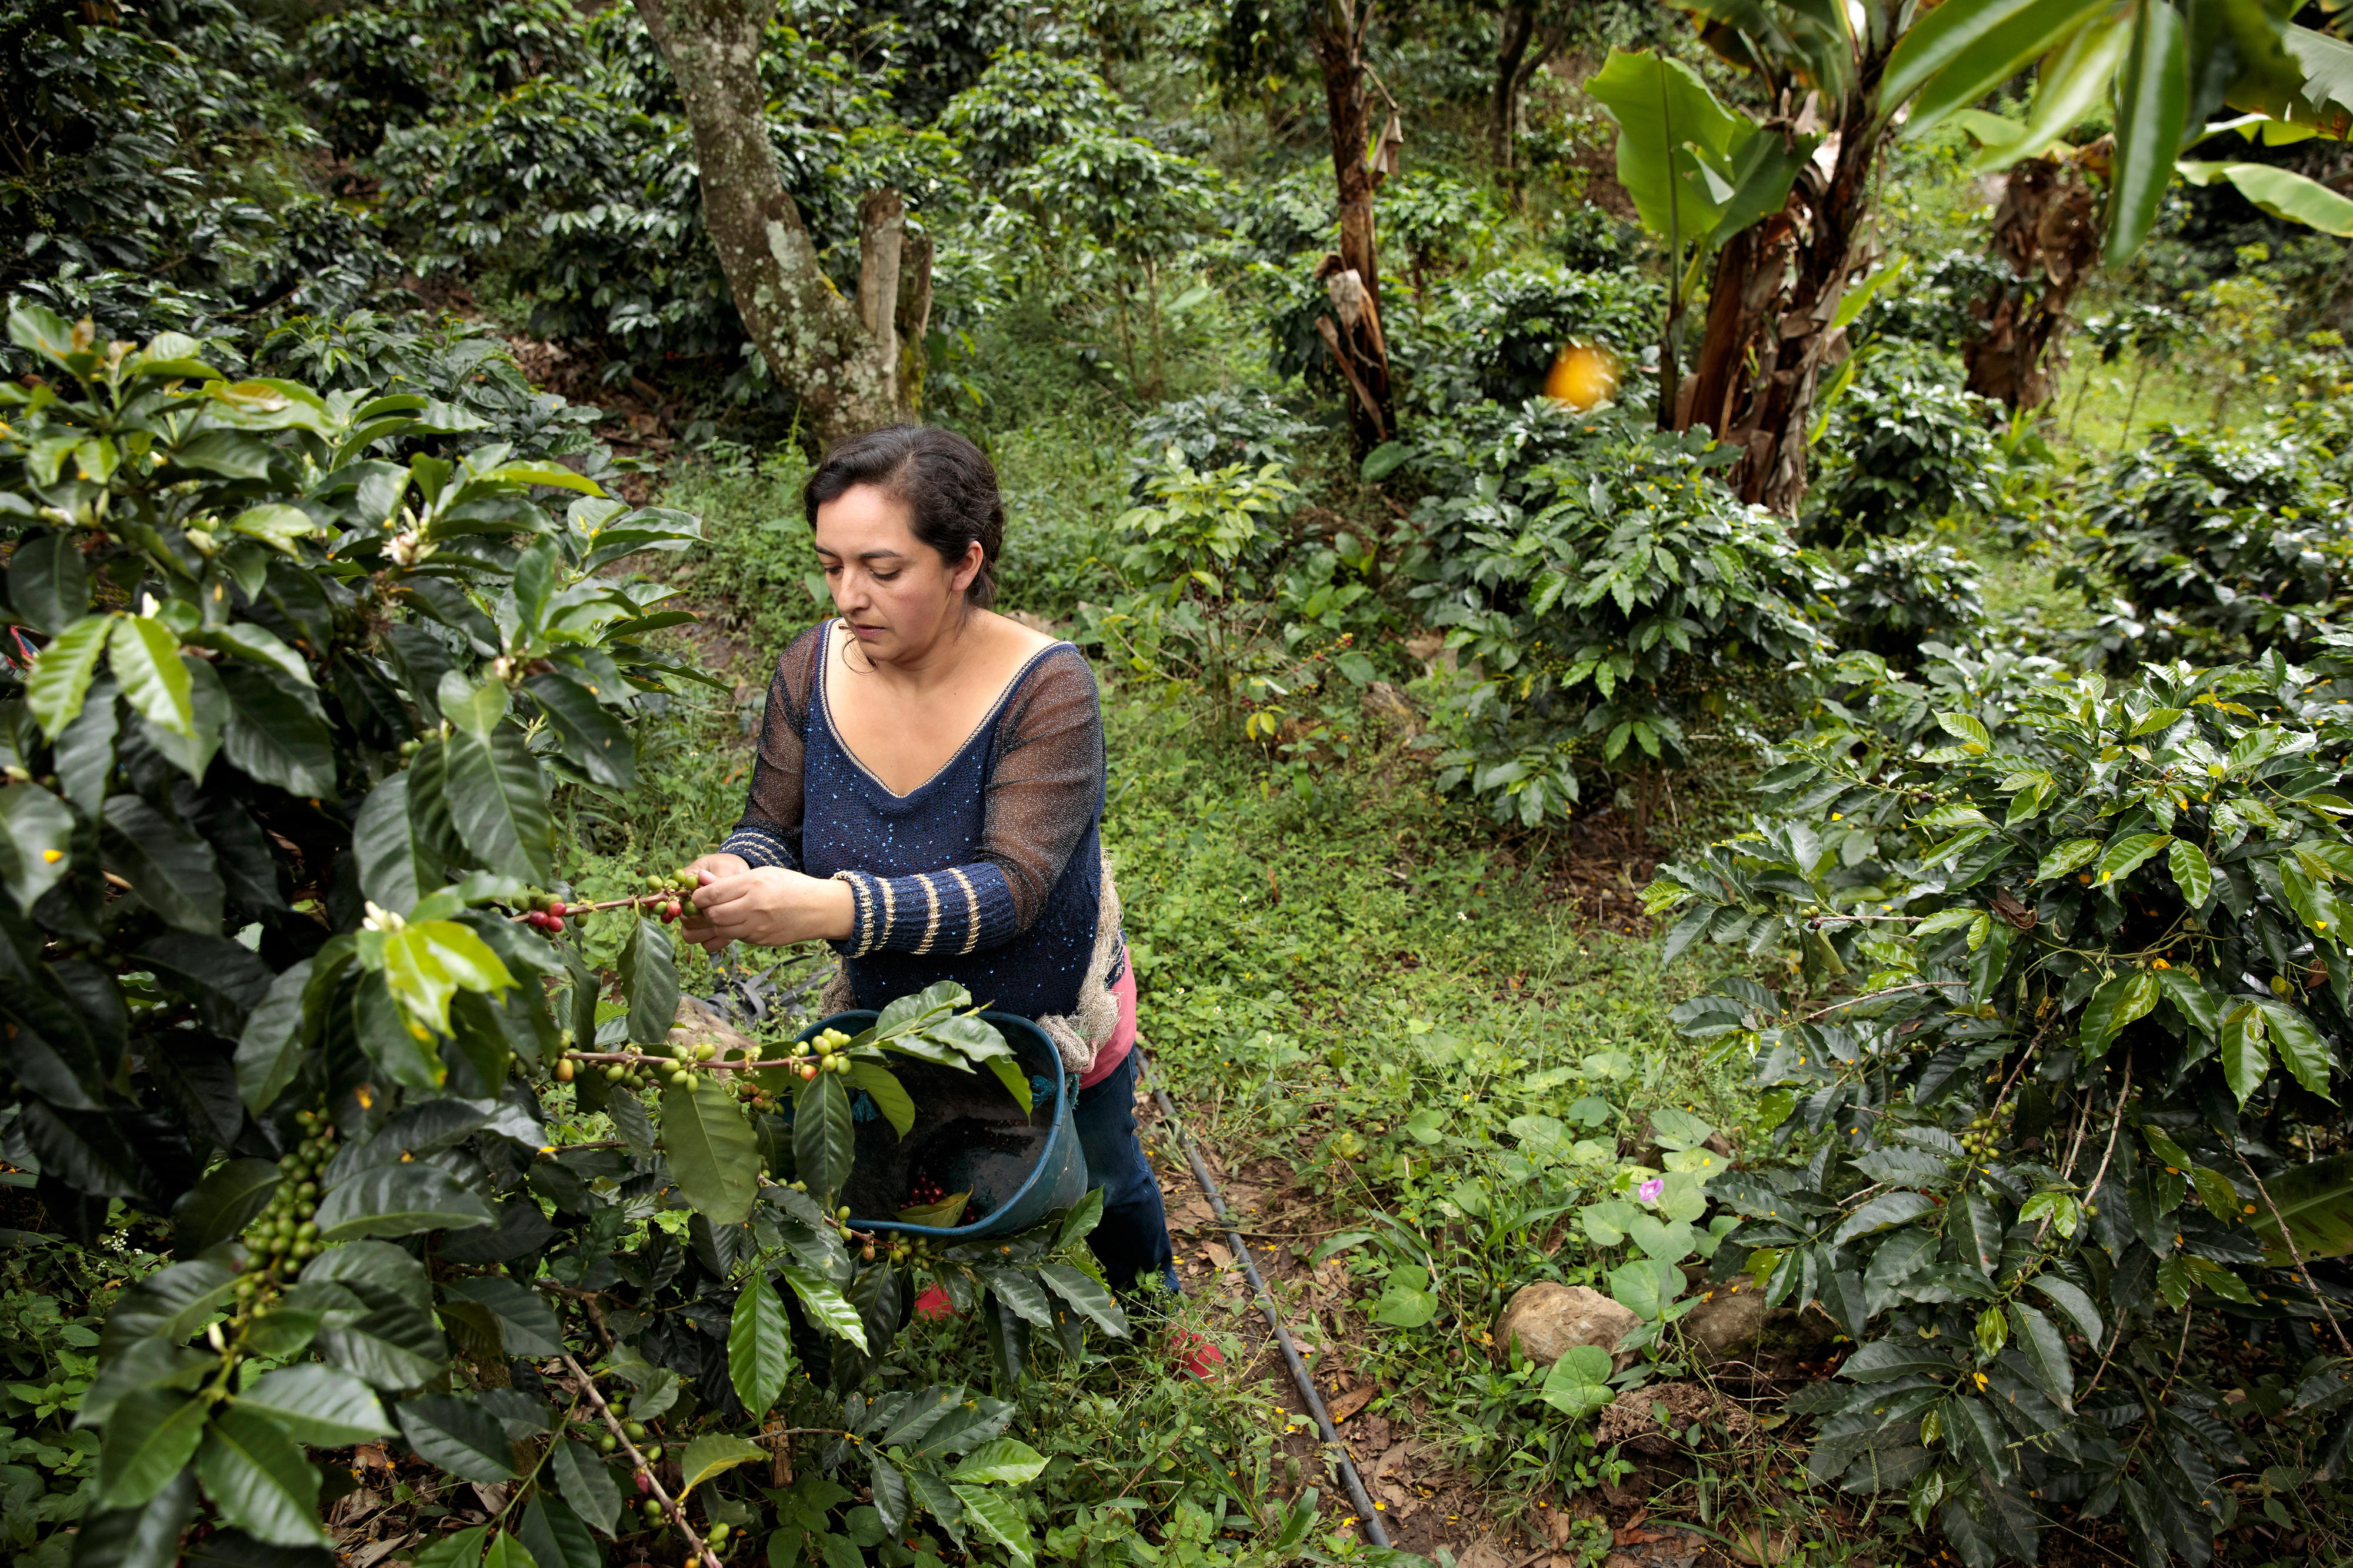 Cielo Gomez, a coffee farmer from El Tablón de Gómez, in the south-east of the Nariño territory in Colombia. Her family has regained land that was illegally occupied as part of the peace process. Through a UN Women project, she has managed to get part of the land registered in her name. Together with other women coffee farmers in the region, she can now build a more economically stable future.